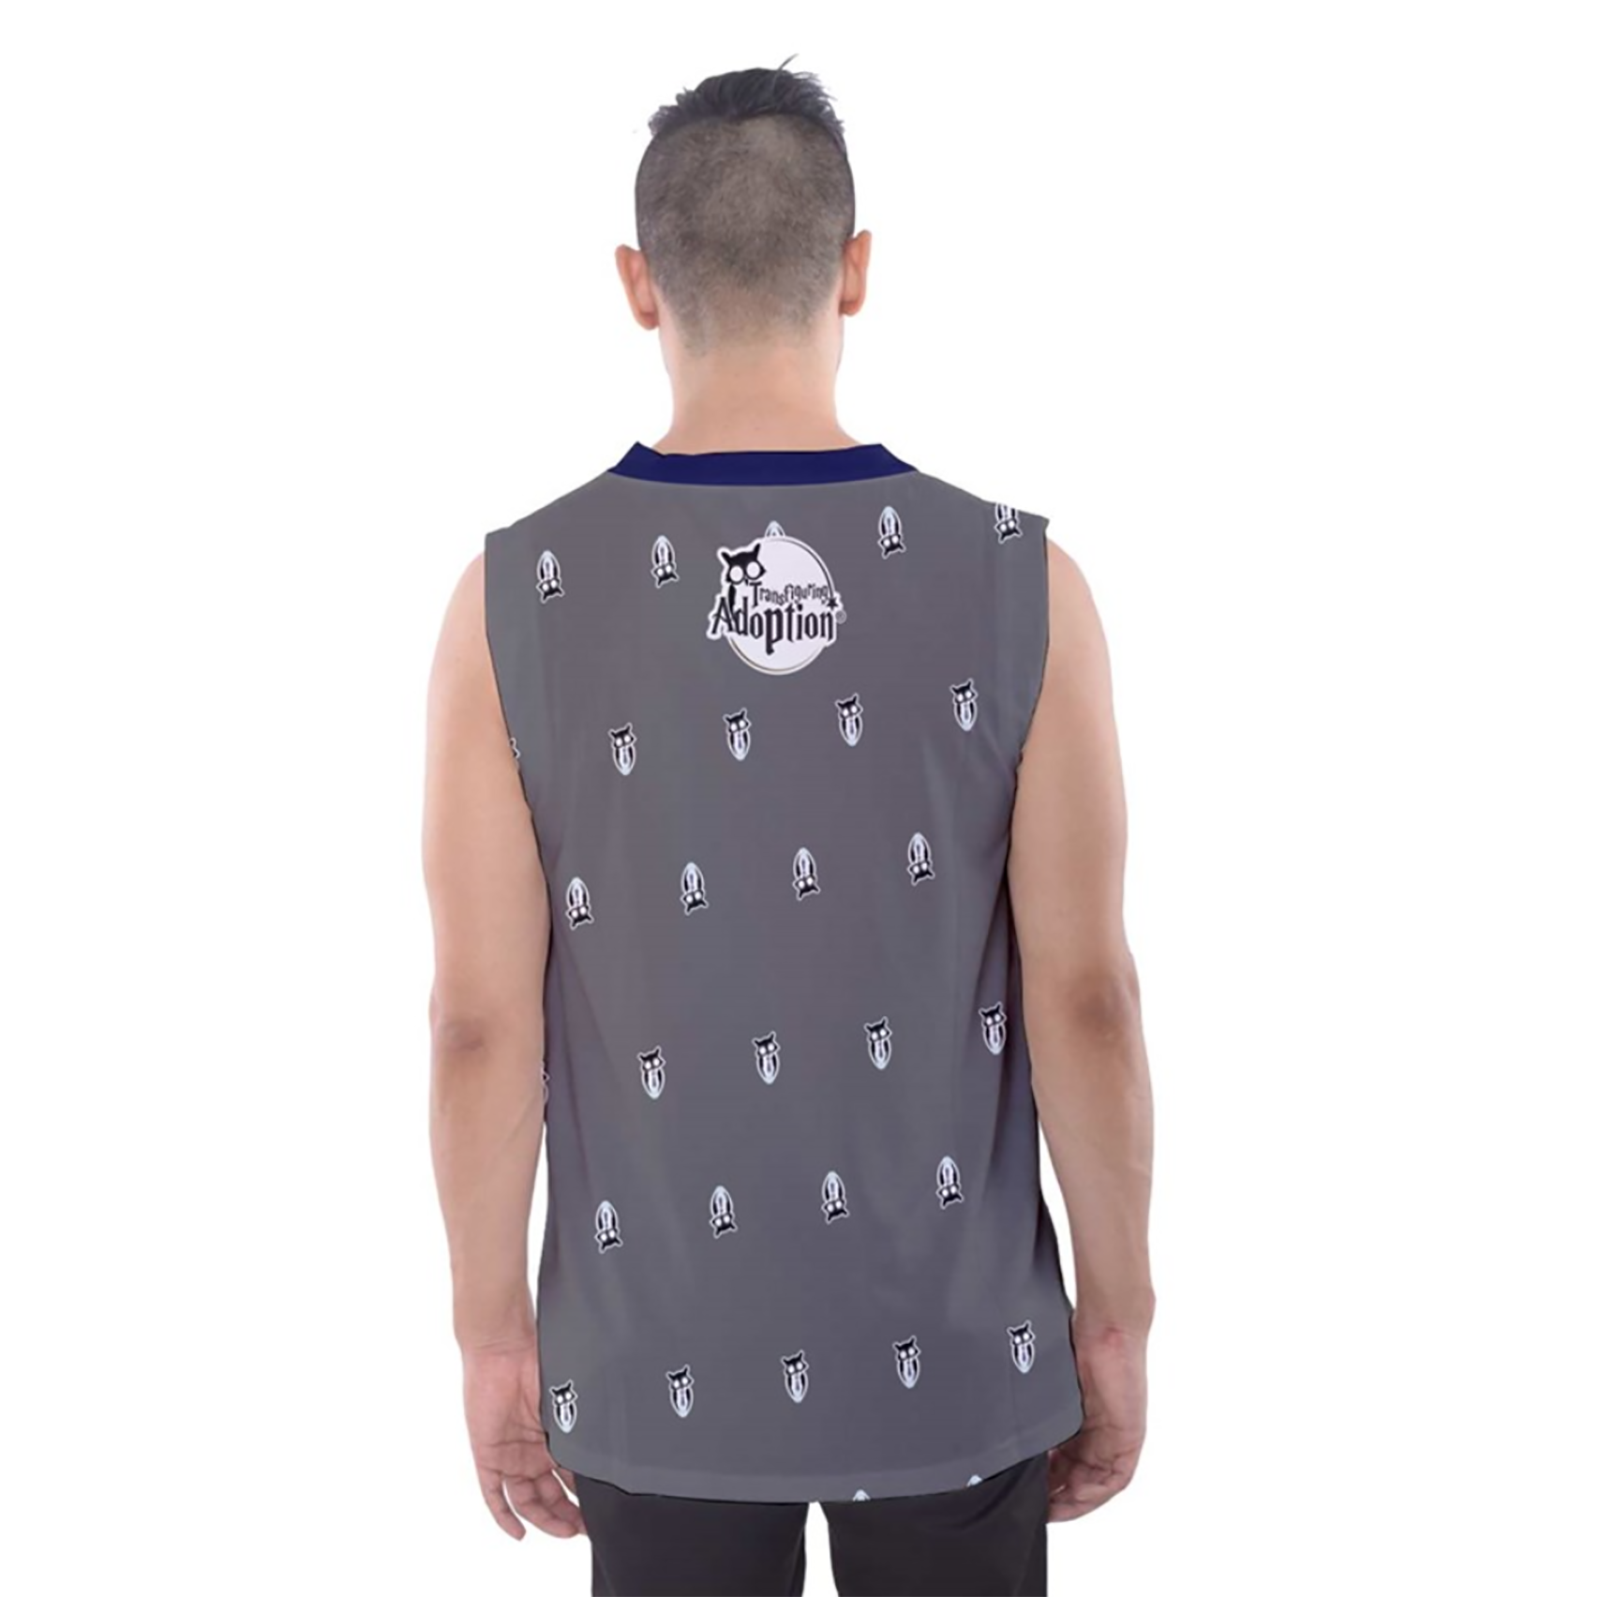 Blue/Gray Owl Men's Tank Top - Inspired by Ravenclaw